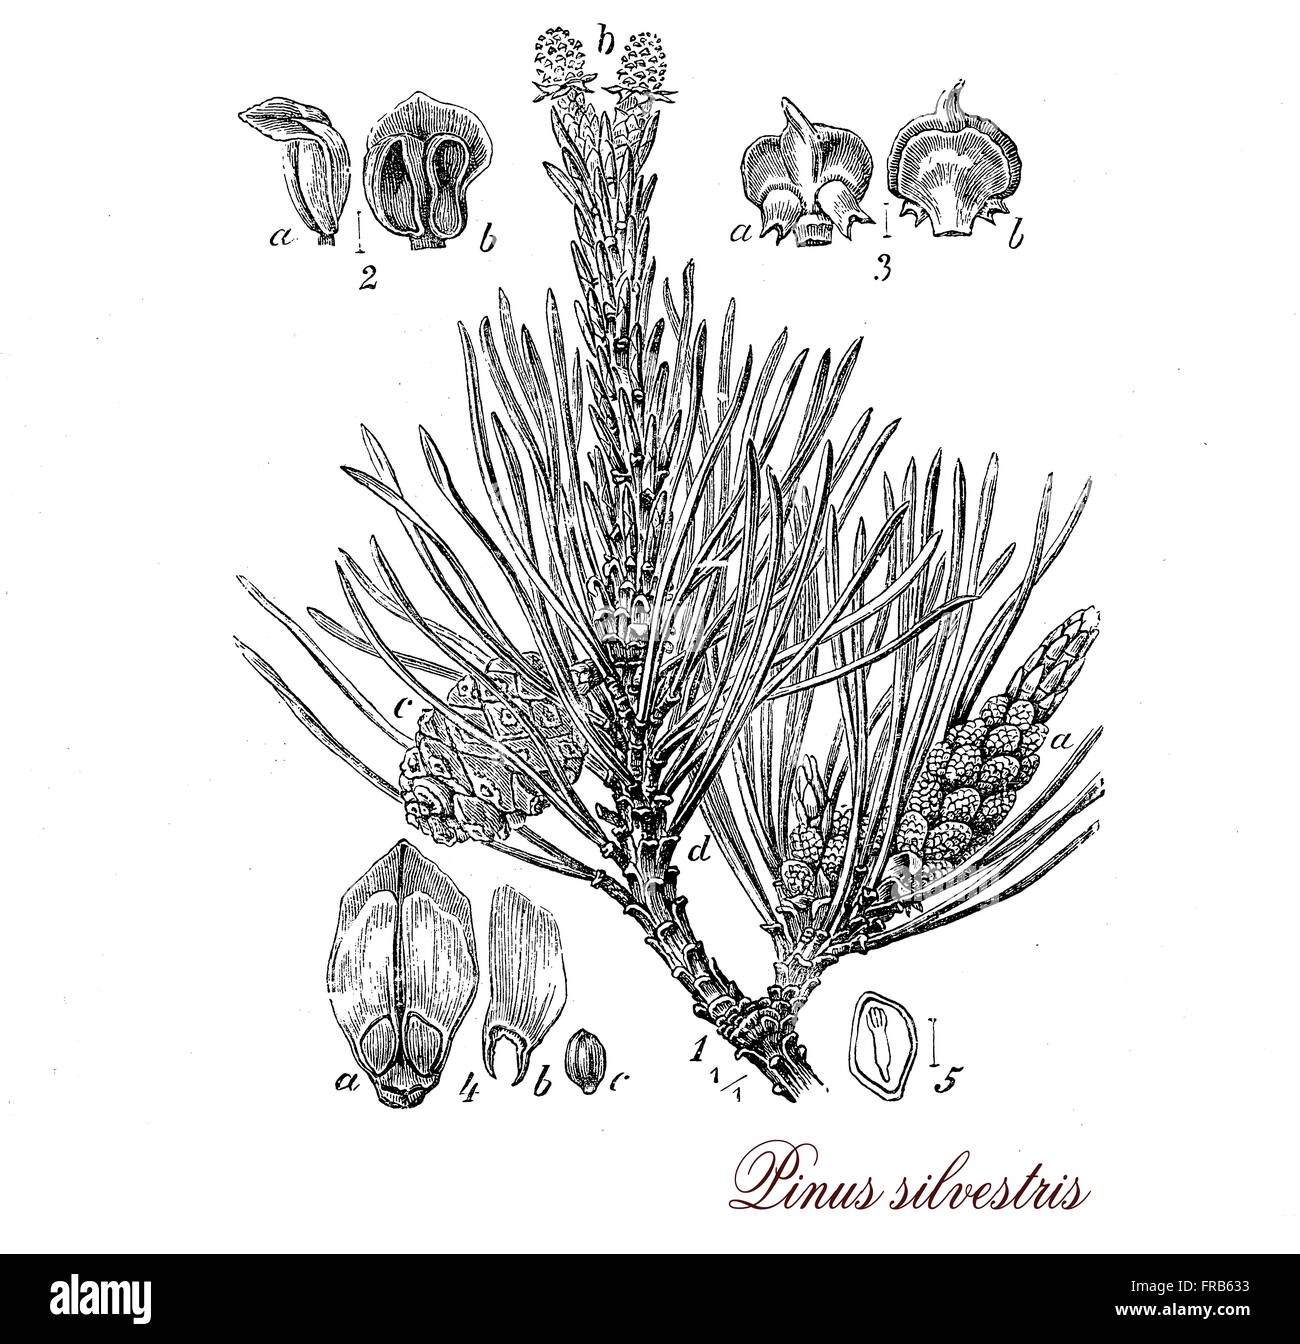 Vintage print describing scots pine (pinus sylvestris)  evergreen coniferous tree botanical morphology: it grows up to 35mt. in height , its lifespan is normally 150–300 years , leaves are green-blue needles, fruits are yellow-brown cones. Stock Photo